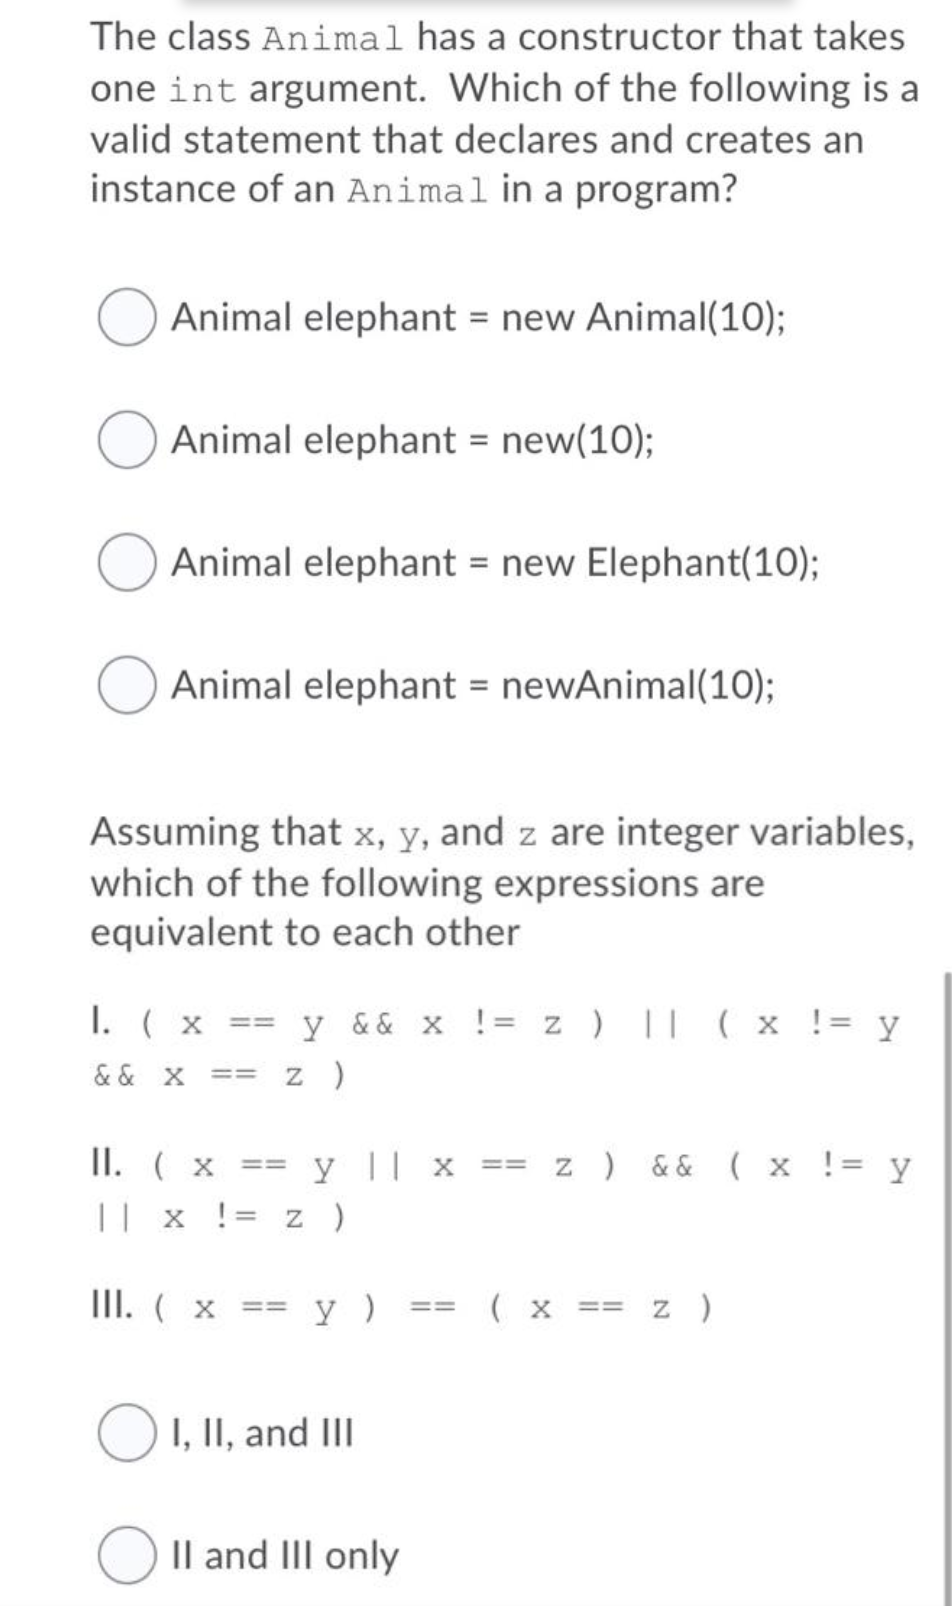 The class Animal has a constructor that takes
one int argument. Which of the following is a
valid statement that declares and creates an
instance of an Animal in a program?
Animal elephant = new Animal(10);
Animal elephant = new(10);
Animal elephant = new Elephant(10);
Animal elephant = newAnimal(10);
Assuming that x, y, and z are integer variables,
which of the following expressions are
equivalent to each other
I. ( x == y && x != z ) || (x != y
& & X
== z )
II. ( x
y || x == z ) && ( x != y
%3D33=
|| x != z )
III. ( x == y )
( x == z )
==
O1, II, and III
O Il and III only
